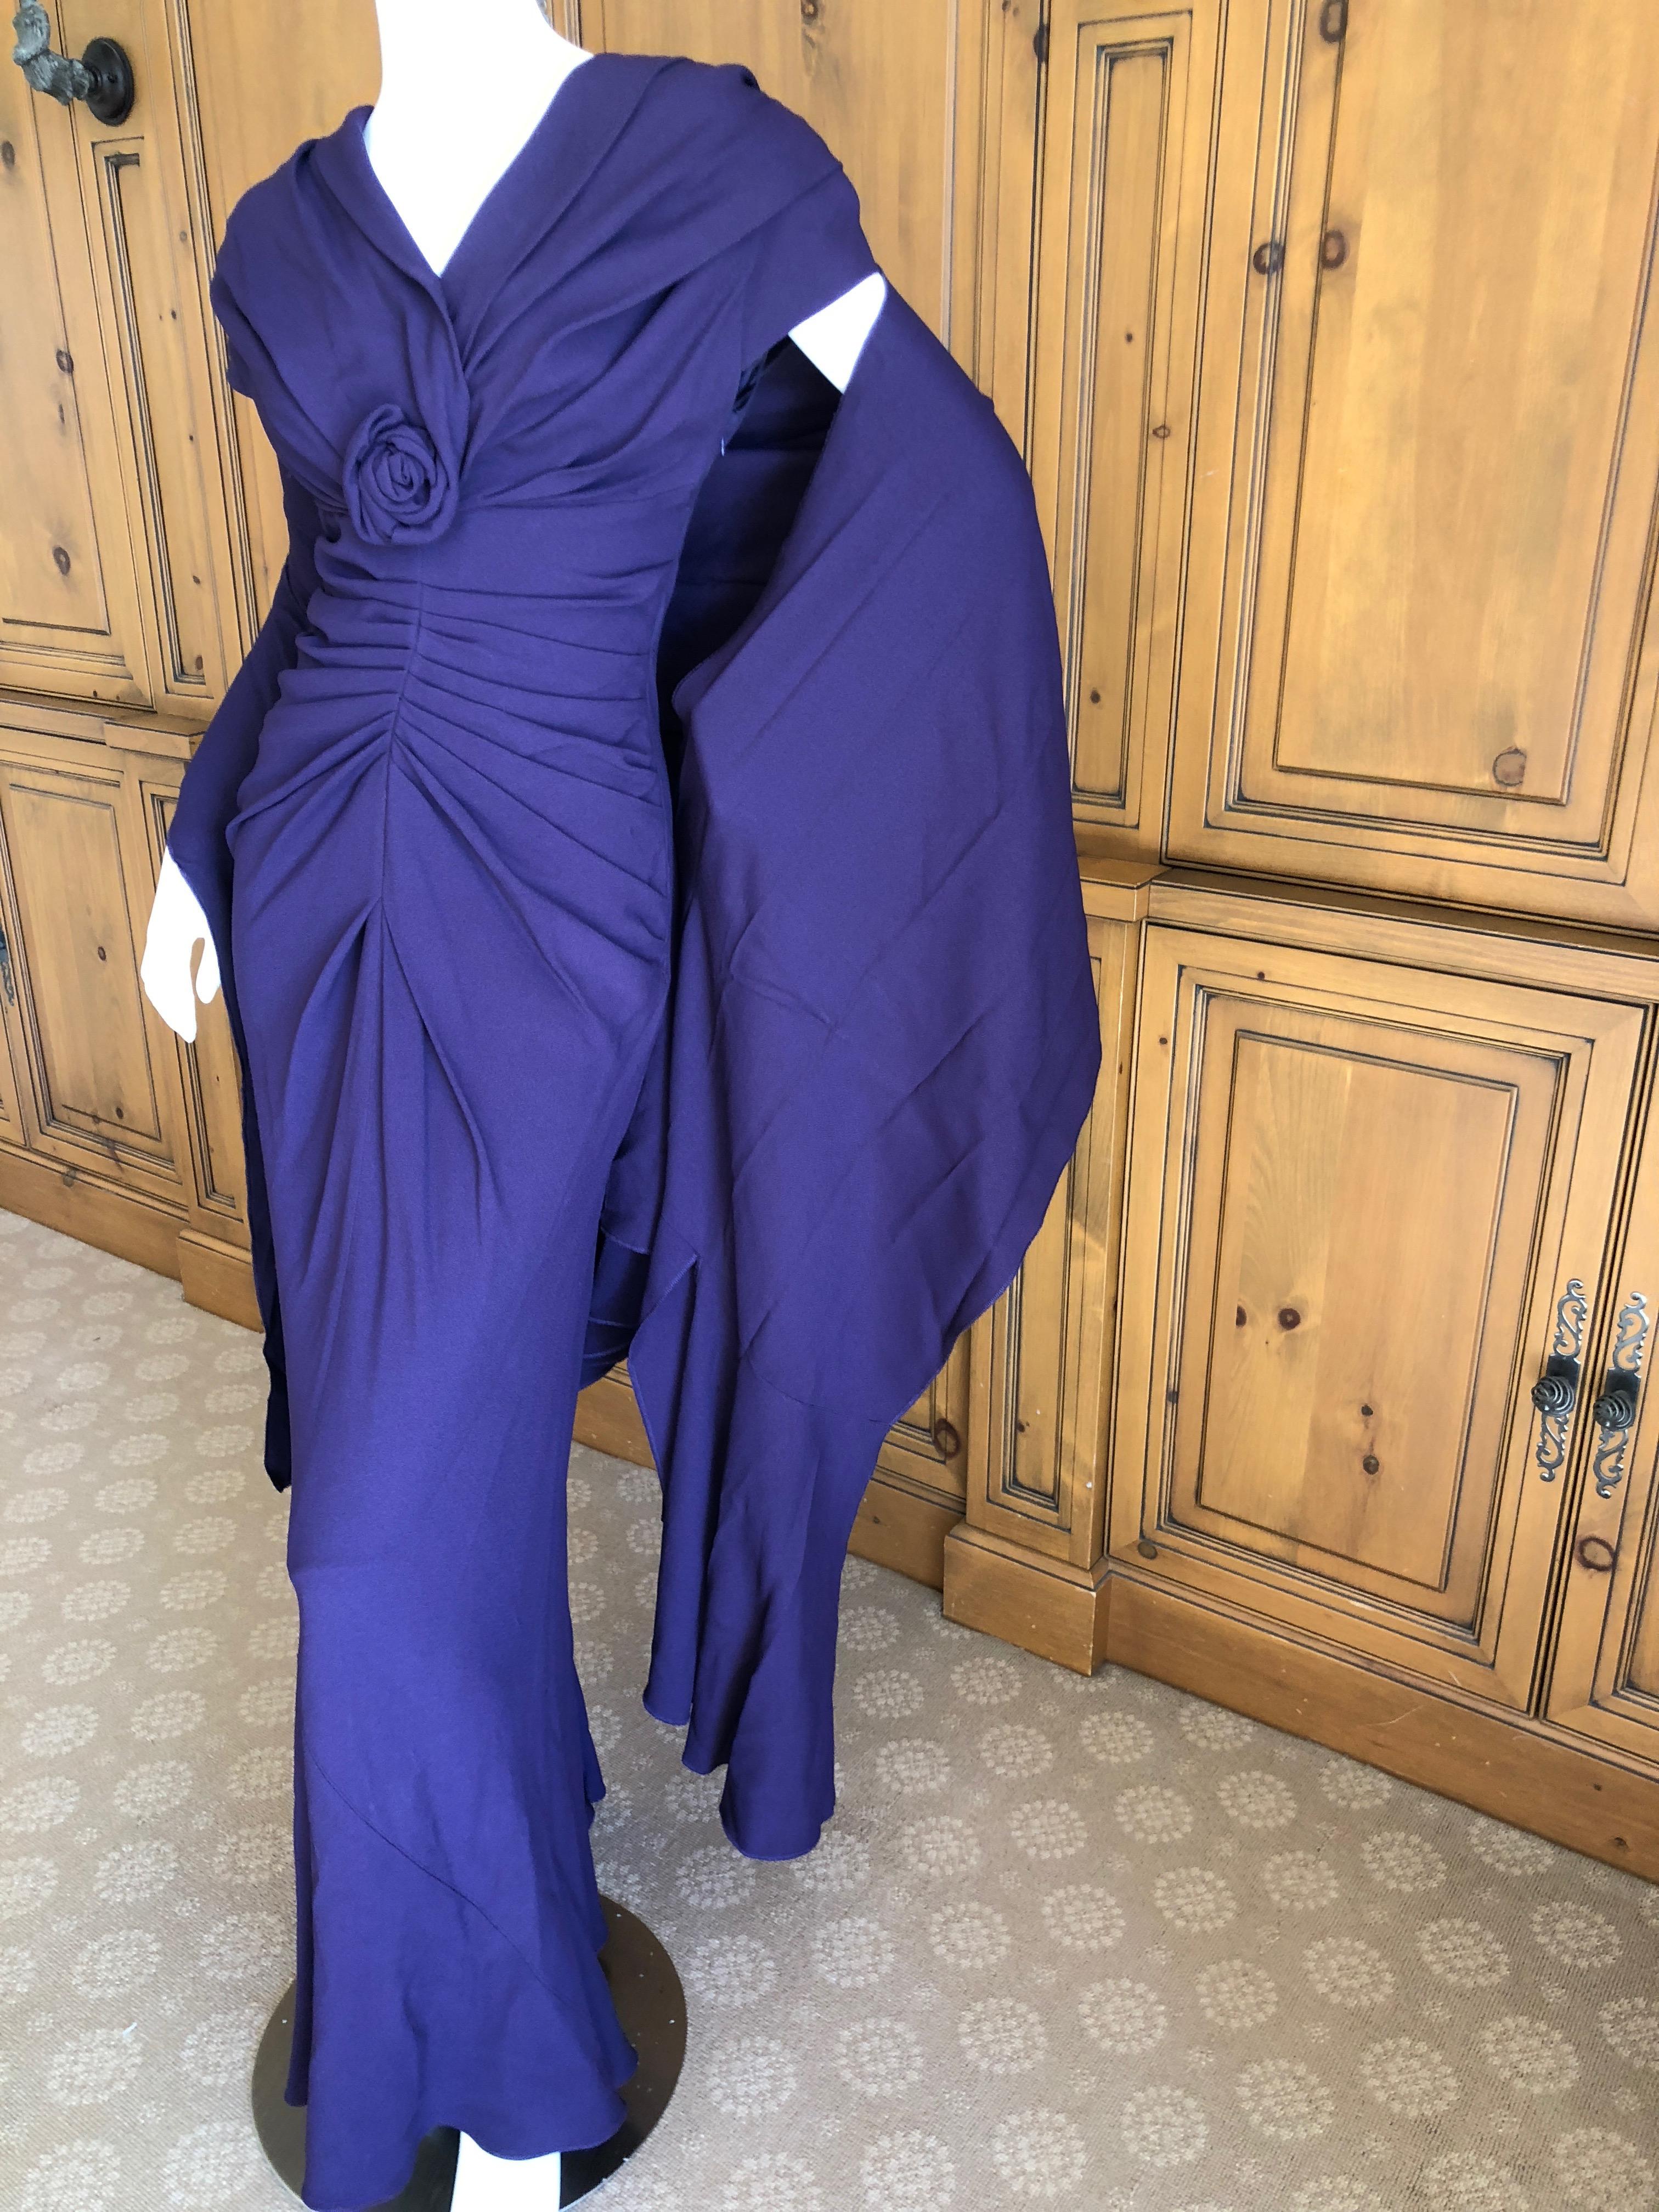 Christian Dior by John Galliano Purple Vintage Silk Lined Evening Dress w Shawl In Excellent Condition For Sale In Cloverdale, CA